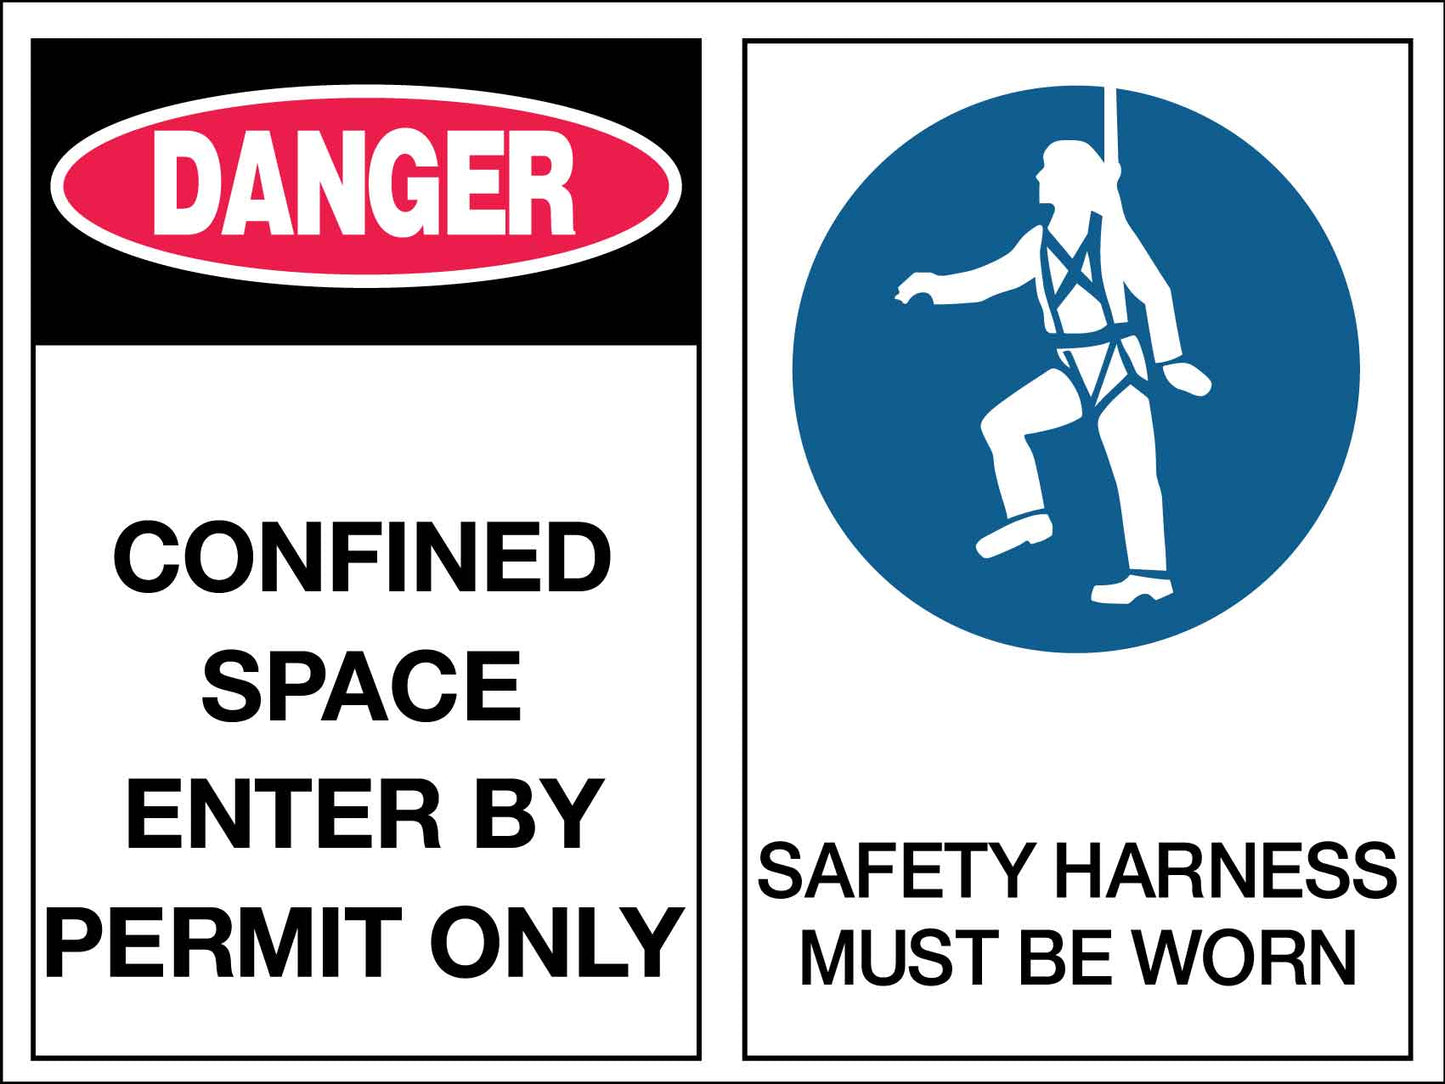 Danger Confined Space Enter by Permit Only Safety Harness Sign